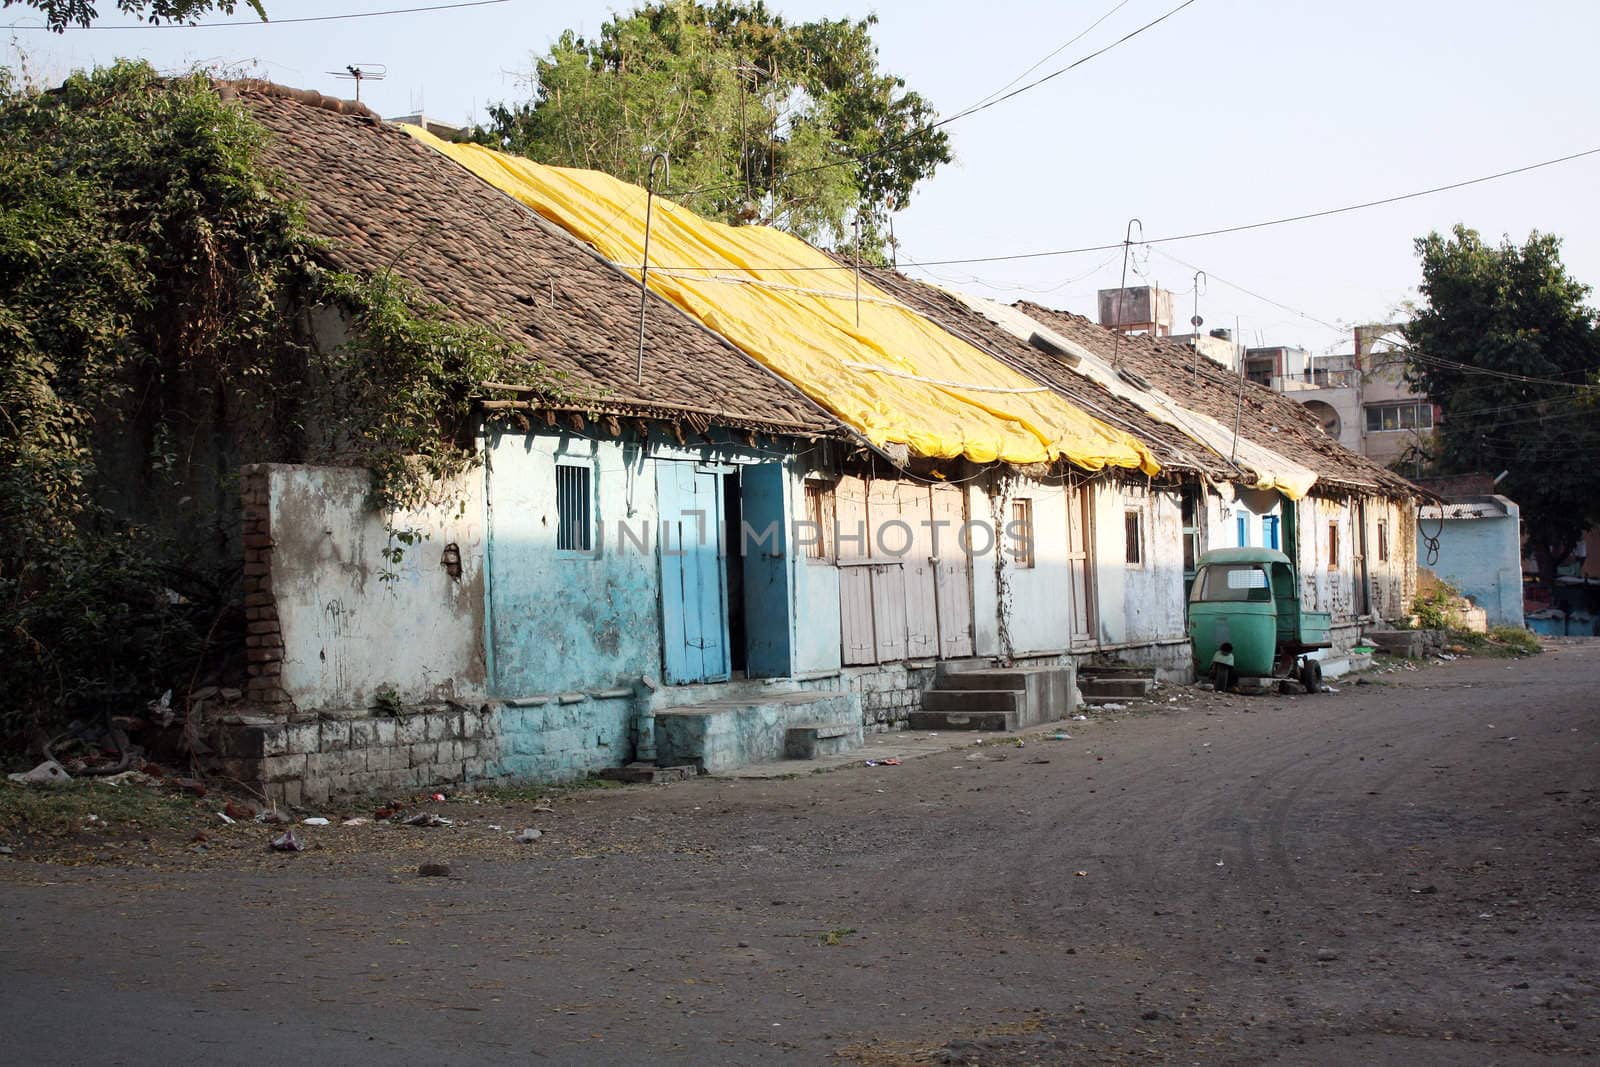 The architecture of traditional houses in a small village, in India